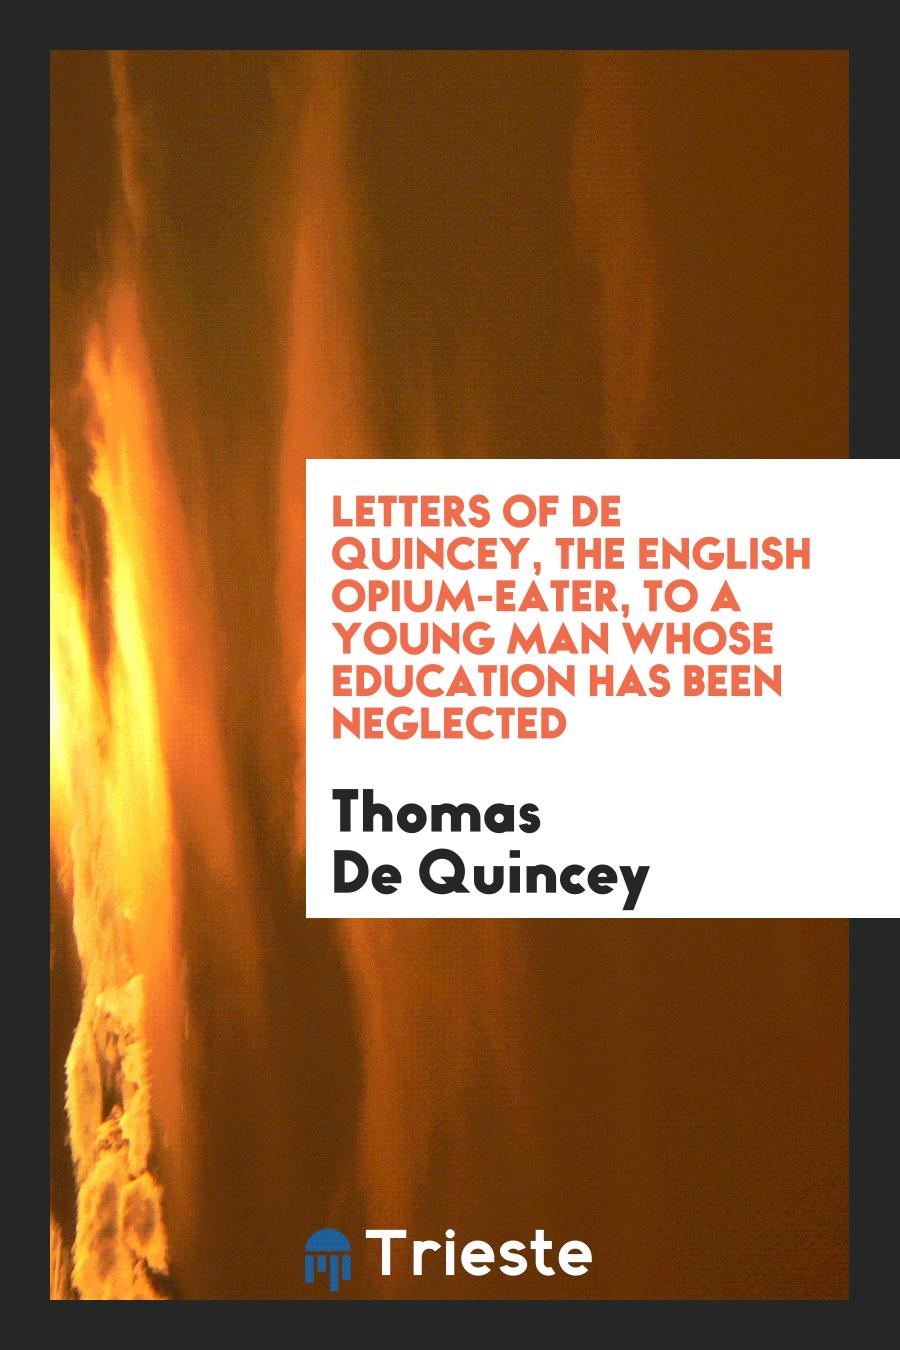 Letters of De Quincey, the English Opium-eater, to a Young Man Whose Education Has Been Neglected